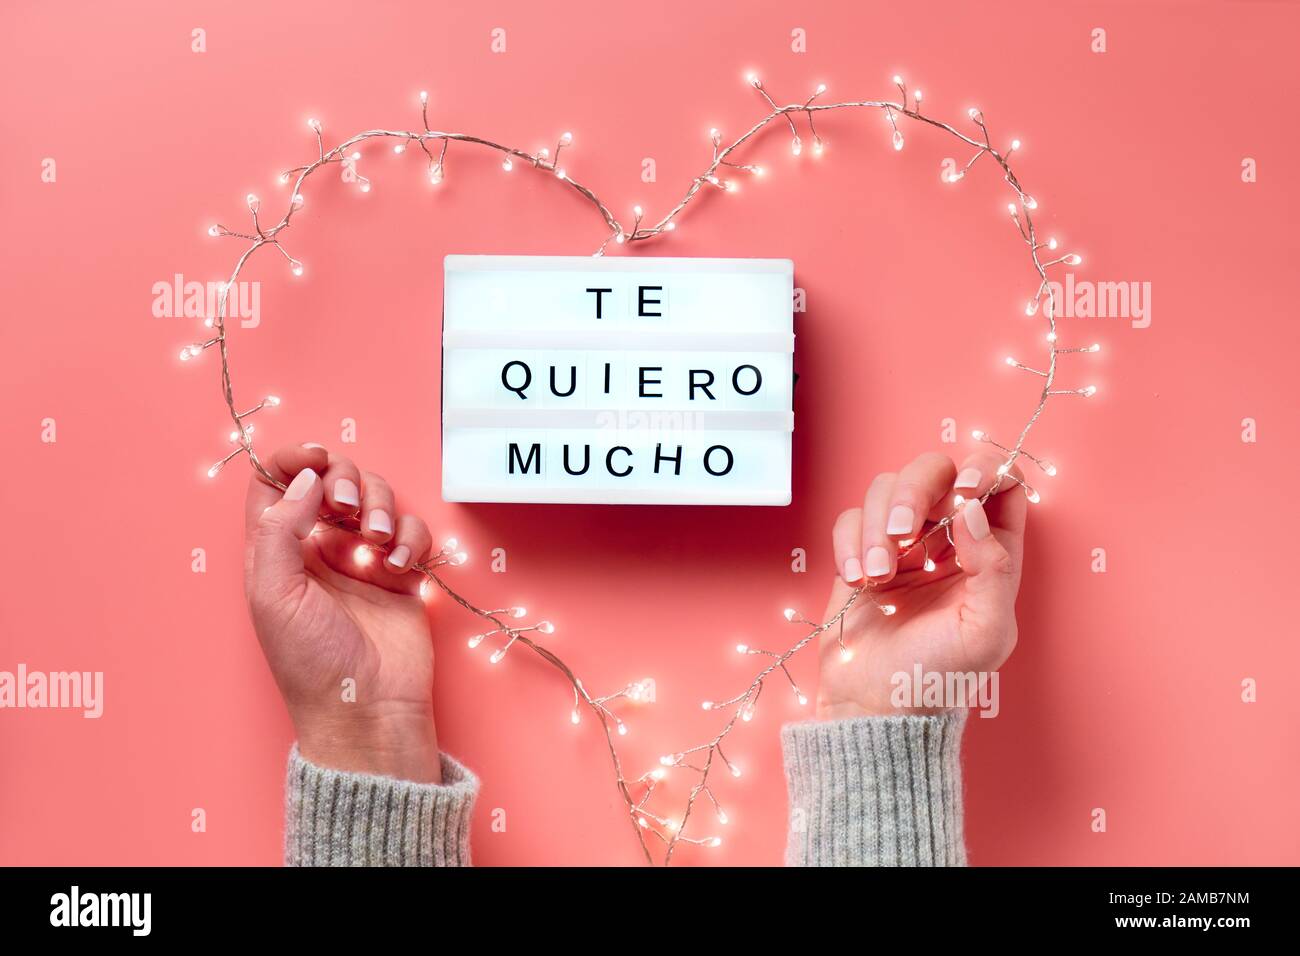 Valentine flat lay, top view on pink background. Lightbox with text 'Te quiero mucho' means 'I love you' in Spanish. Light garland in heart shape held Stock Photo